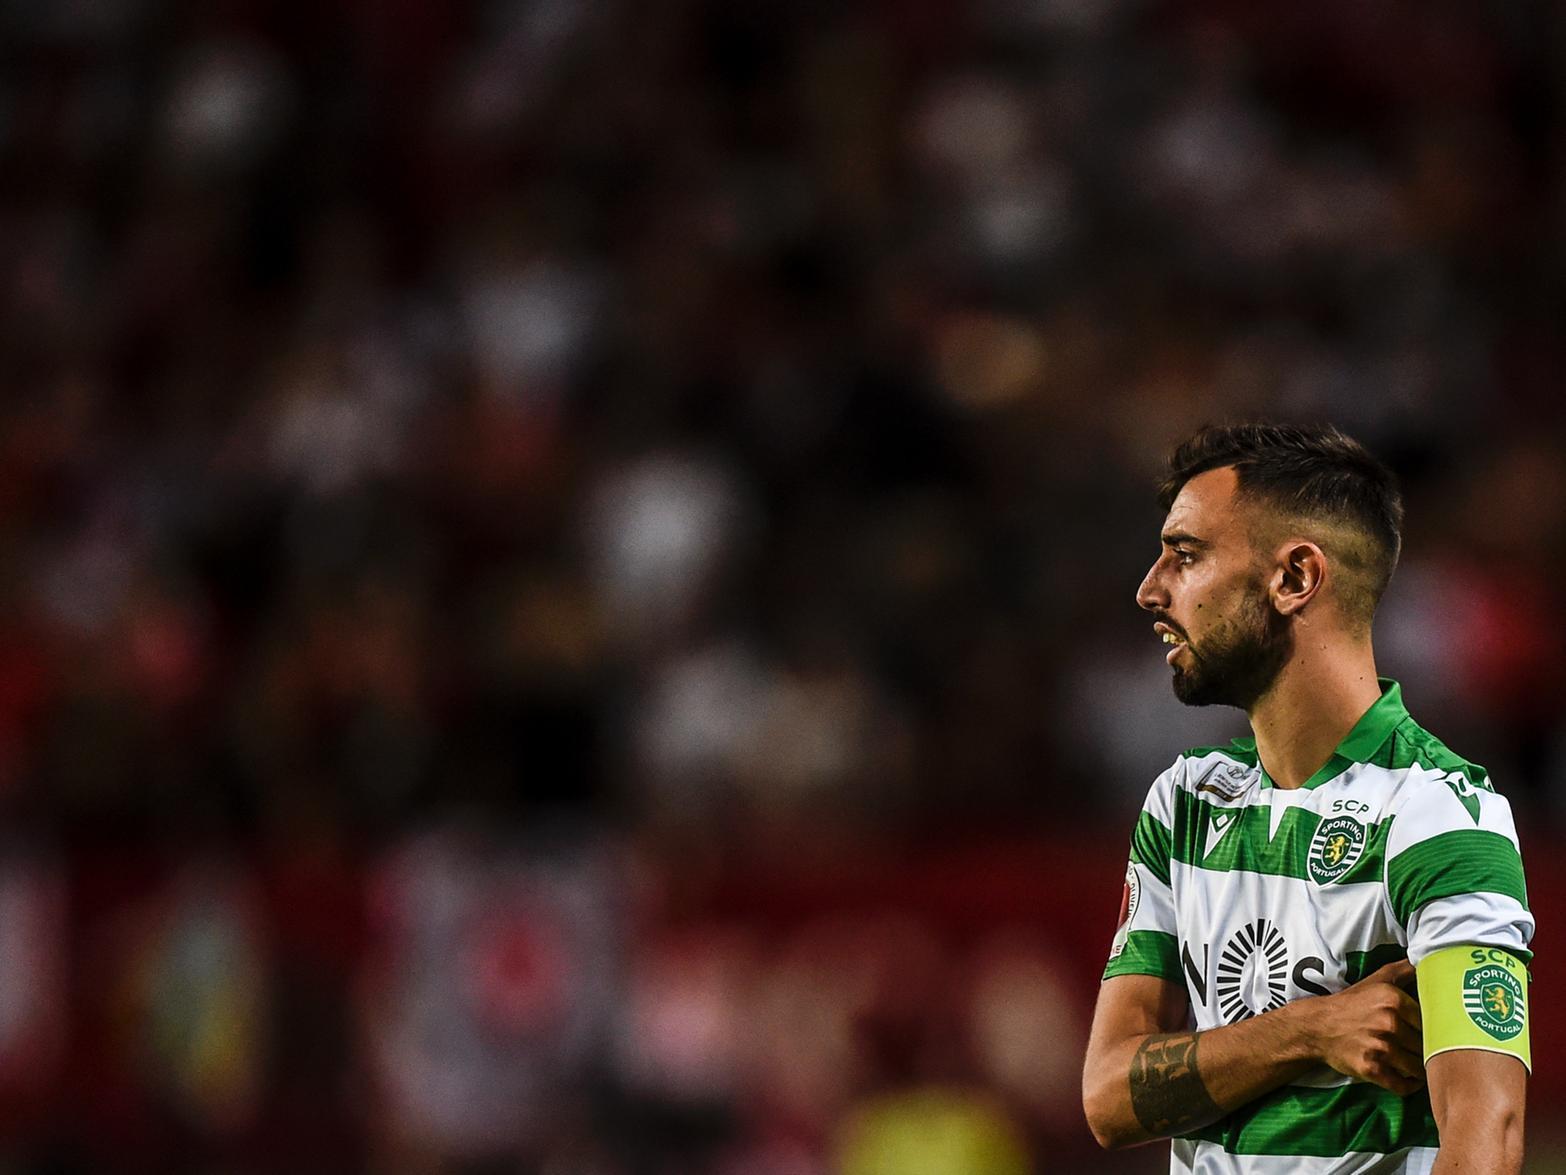 Manchester United are set to revive their interest in signing Sporting Lisbon playmaker Bruno Fernandes (Goal.com)